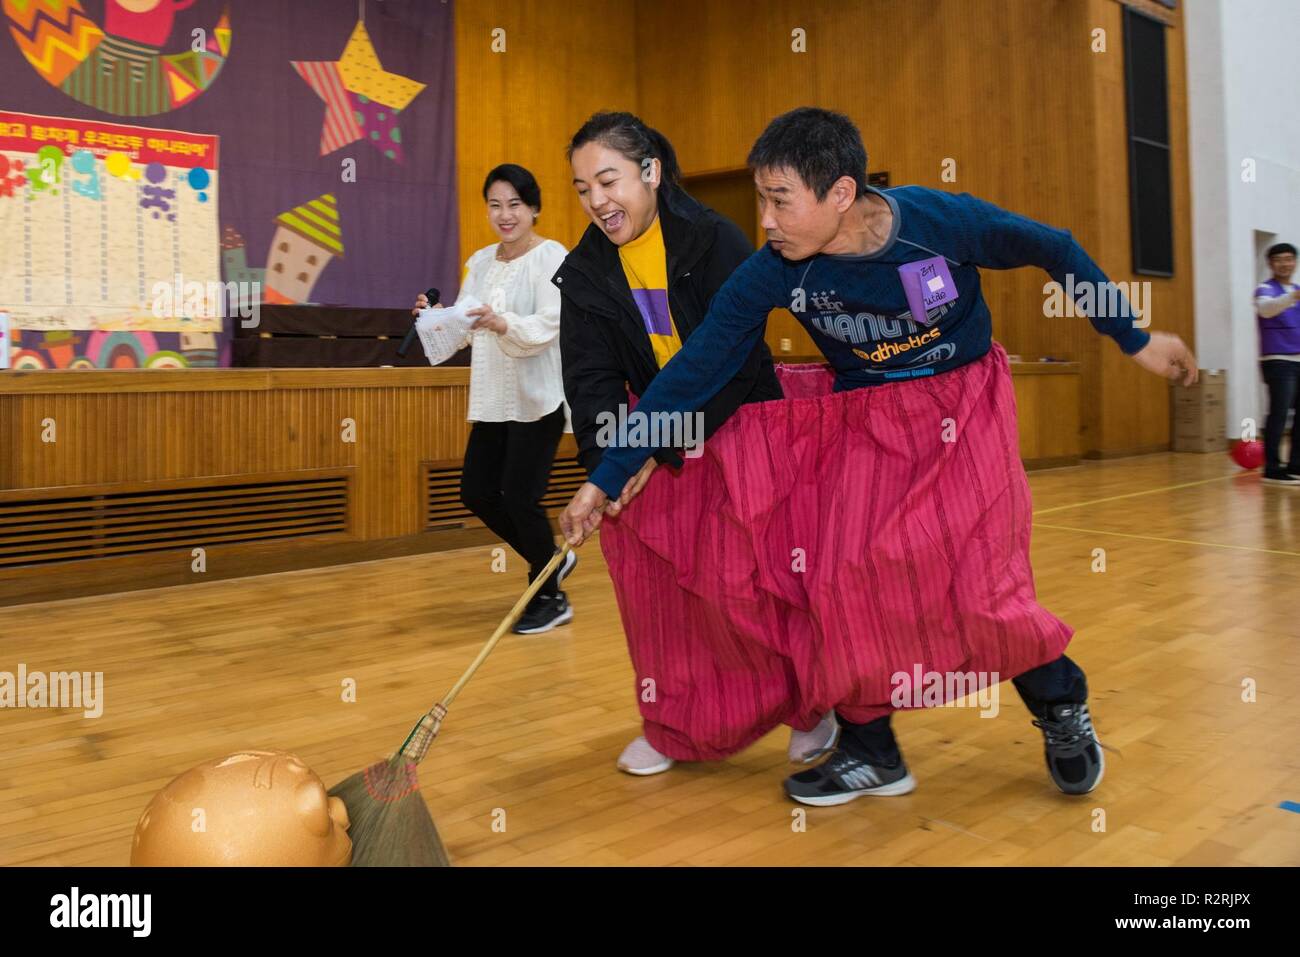 KOJE-DO, Republic of Korea (Nov. 03, 2018) A Sailor participates in a community relations event with a resident of the Aikwangwon Home and School for the Mentally and Physically Disabled in Koje-do. The U.S. Navy and Aikwangwon community outreach program spans more than 60 years and began when U.S. Navy doctors and nurses assigned to the U.S. Navy base in Chinhae volunteered at the home during the Korean War. Stock Photo